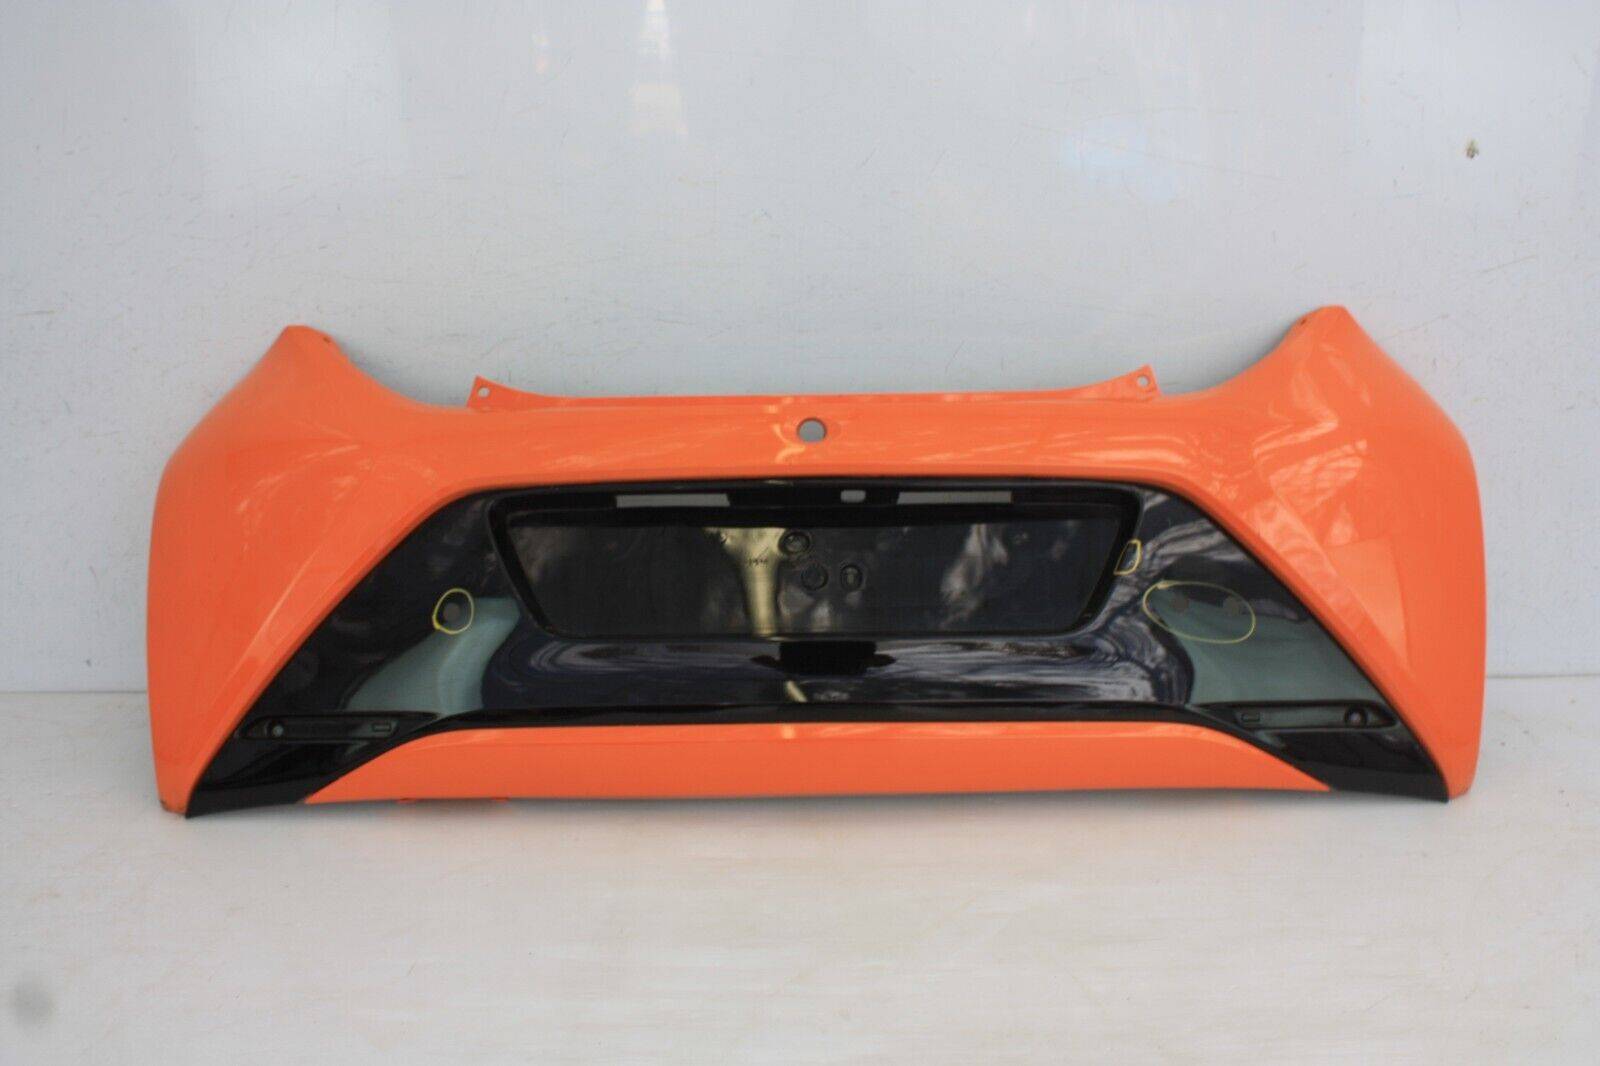 Toyota Aygo Rear Bumper 2014 TO 2018 52159 0H061 Genuine SEE PICS 175377575501